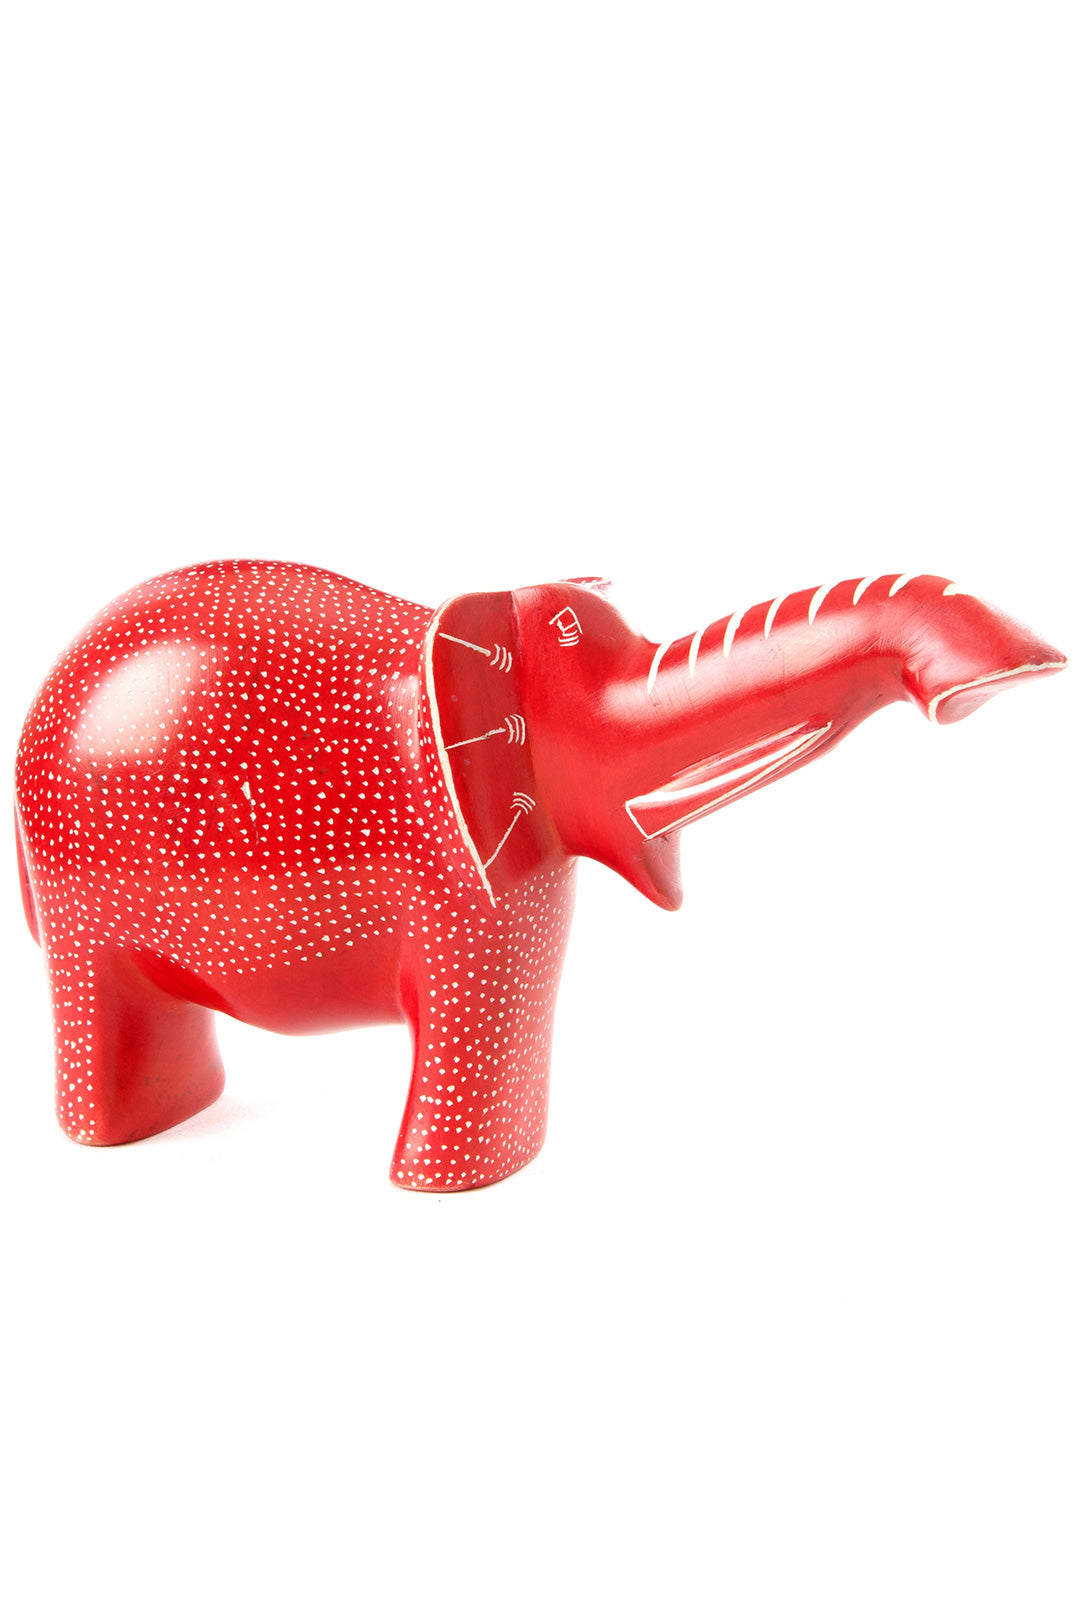 Large Red Polka Dot Elephant with Trunk Up